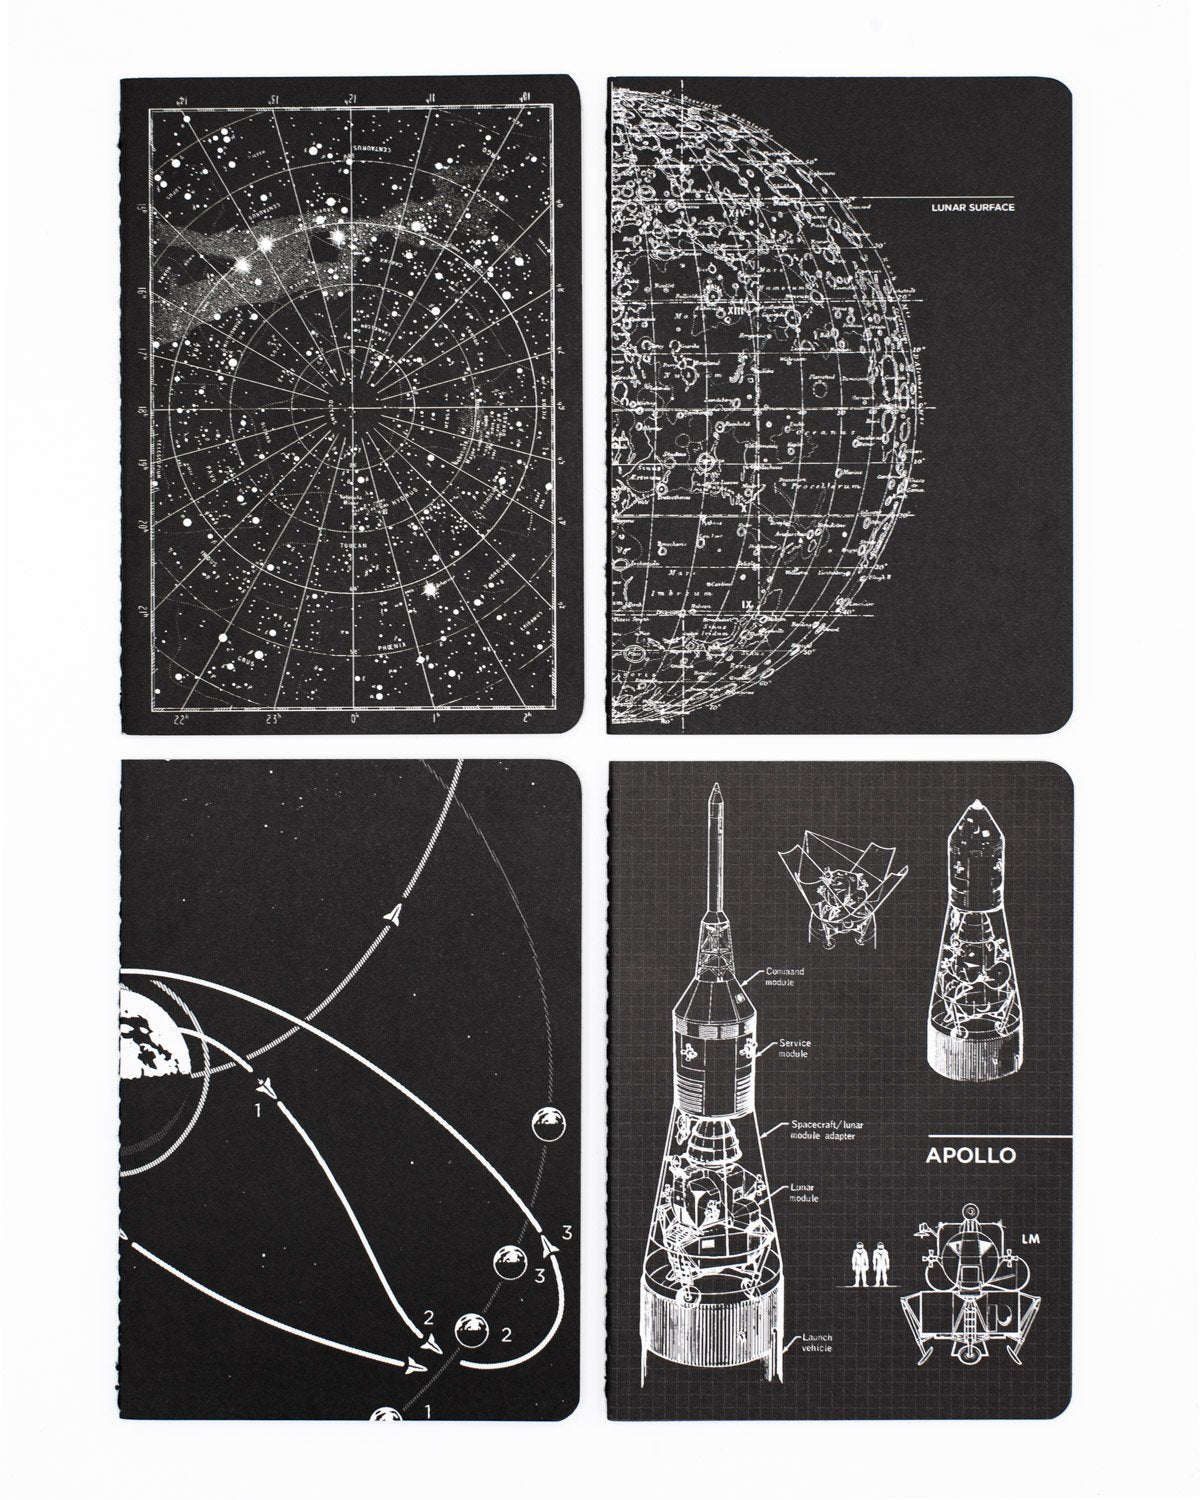 Covers of Space Exploration research series by Cognitive Surplus, mini softcover, 100% recycled paper, field notes